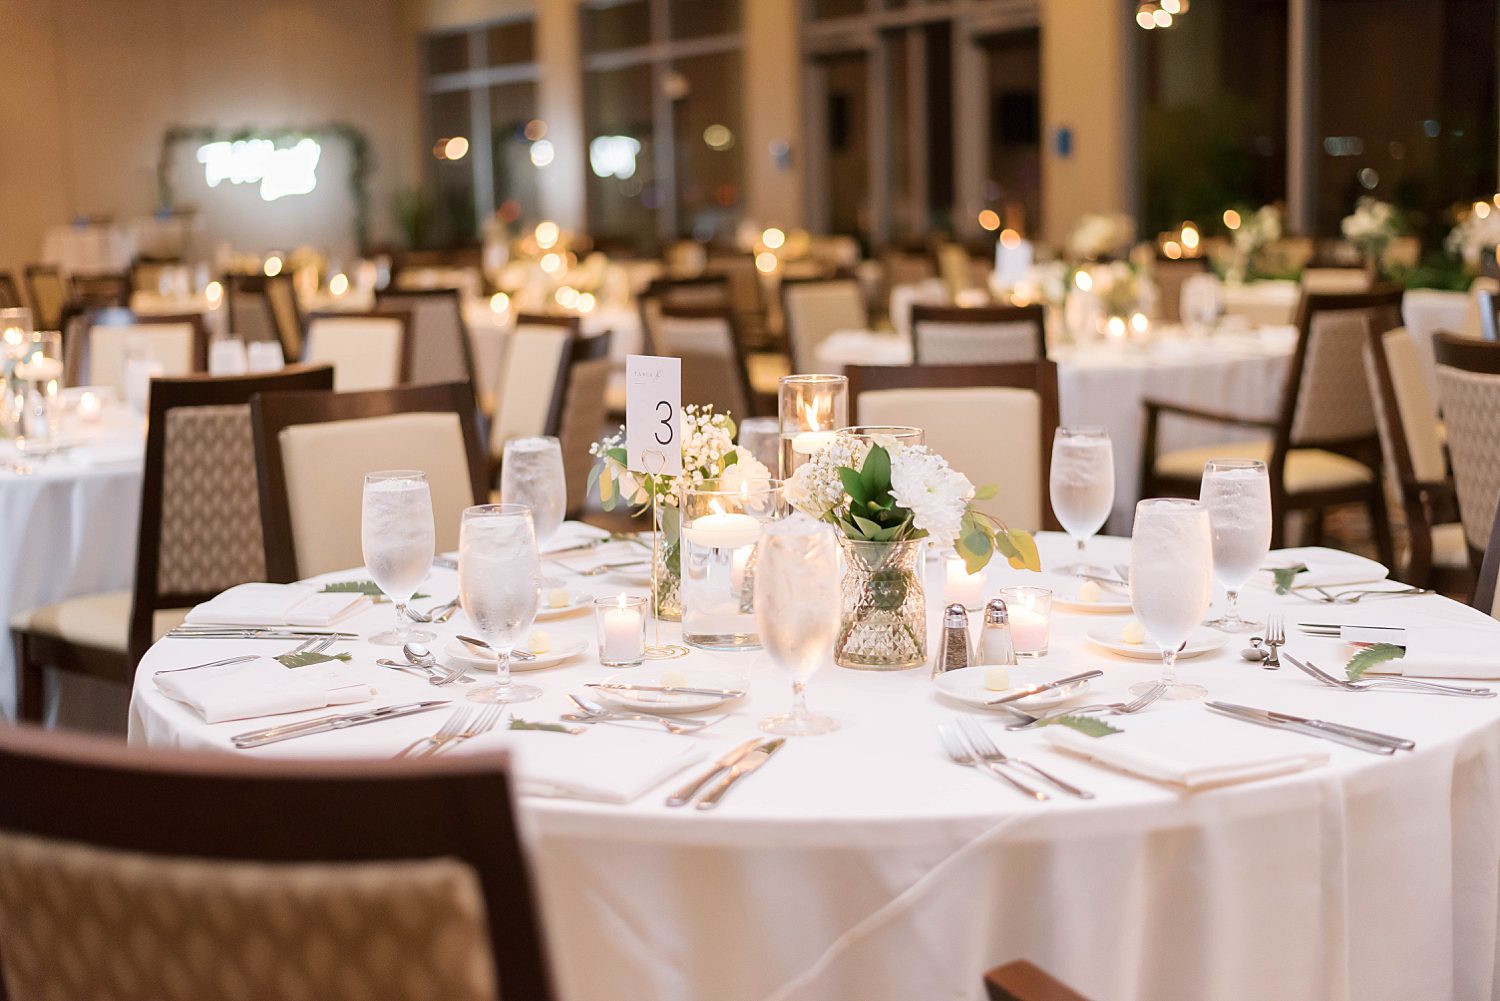 Sarasota Yacht Club wedding reception with gold and white details